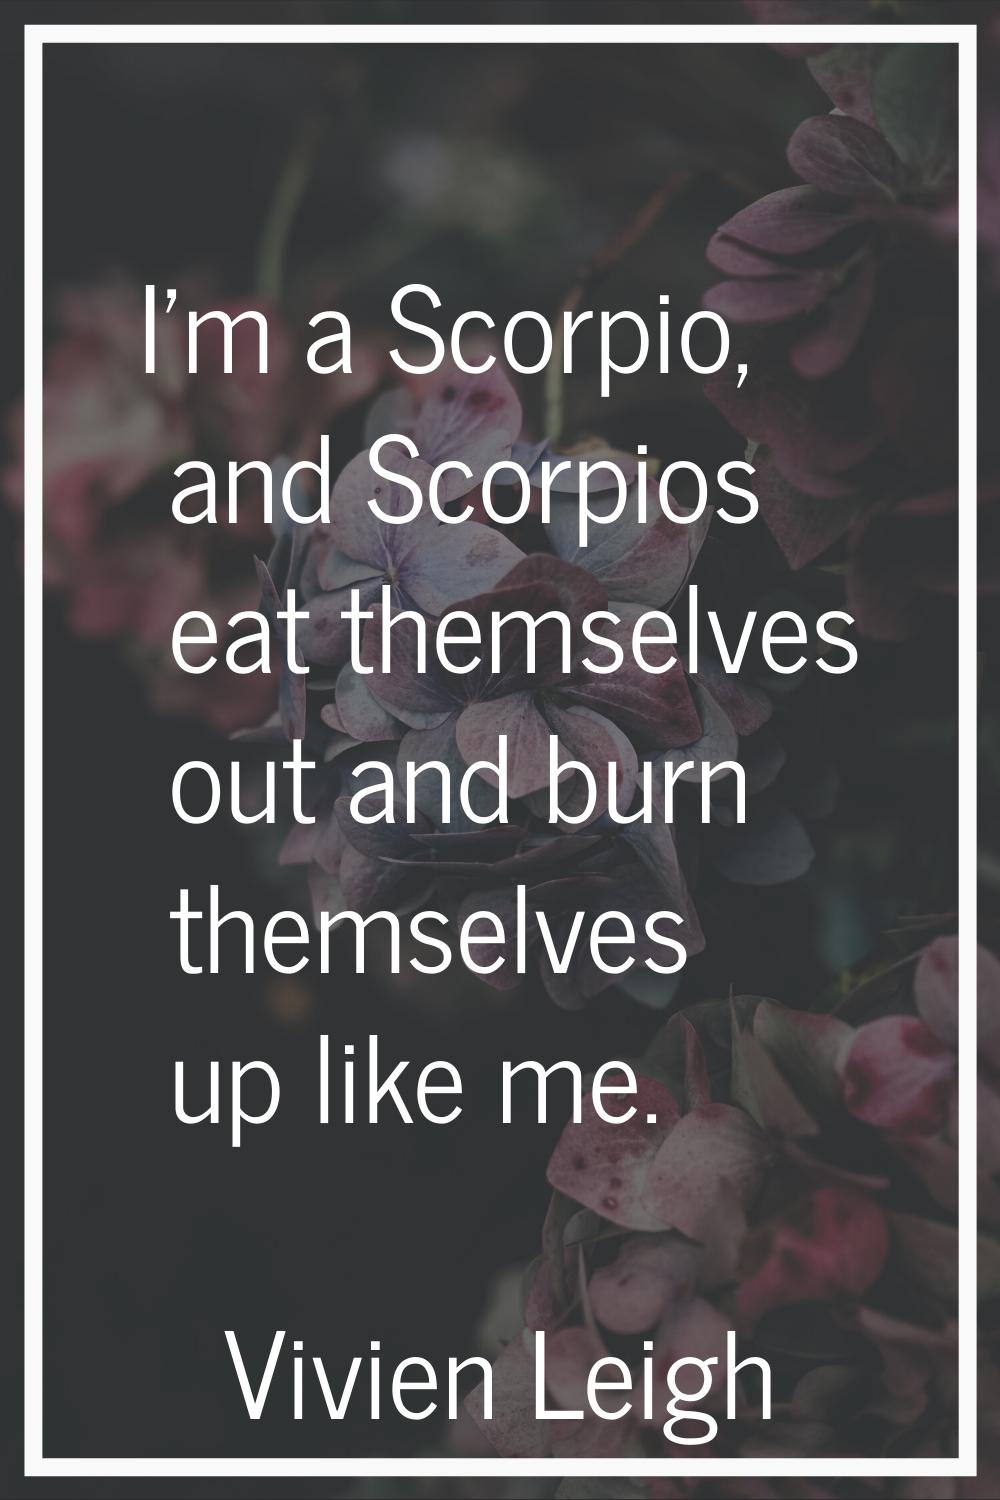 I'm a Scorpio, and Scorpios eat themselves out and burn themselves up like me.